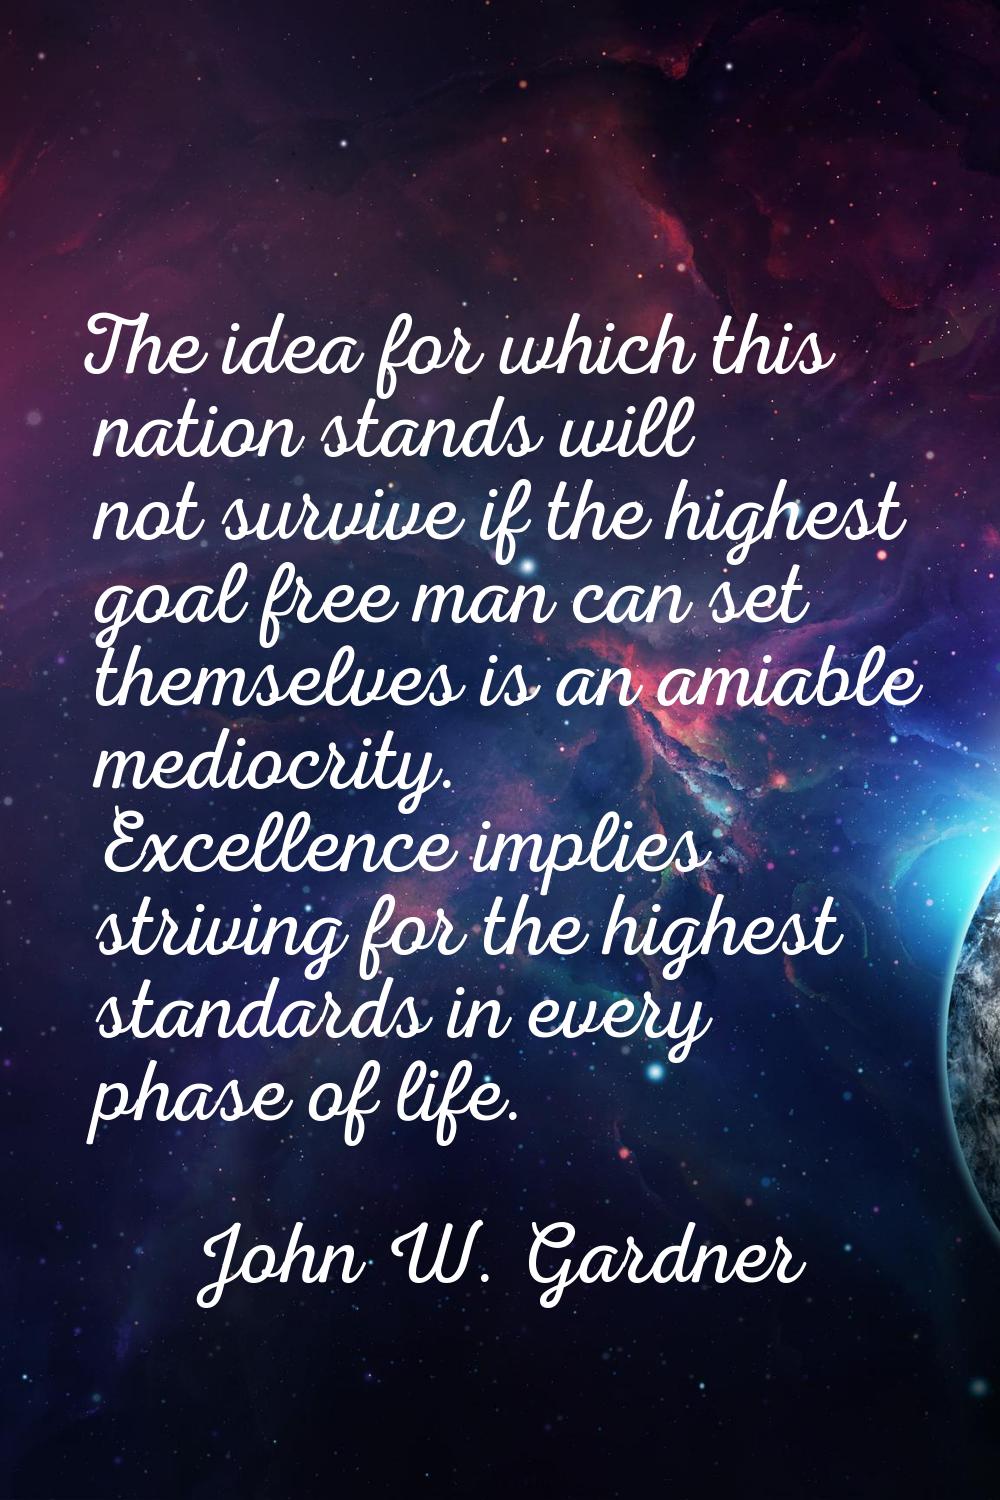 The idea for which this nation stands will not survive if the highest goal free man can set themsel